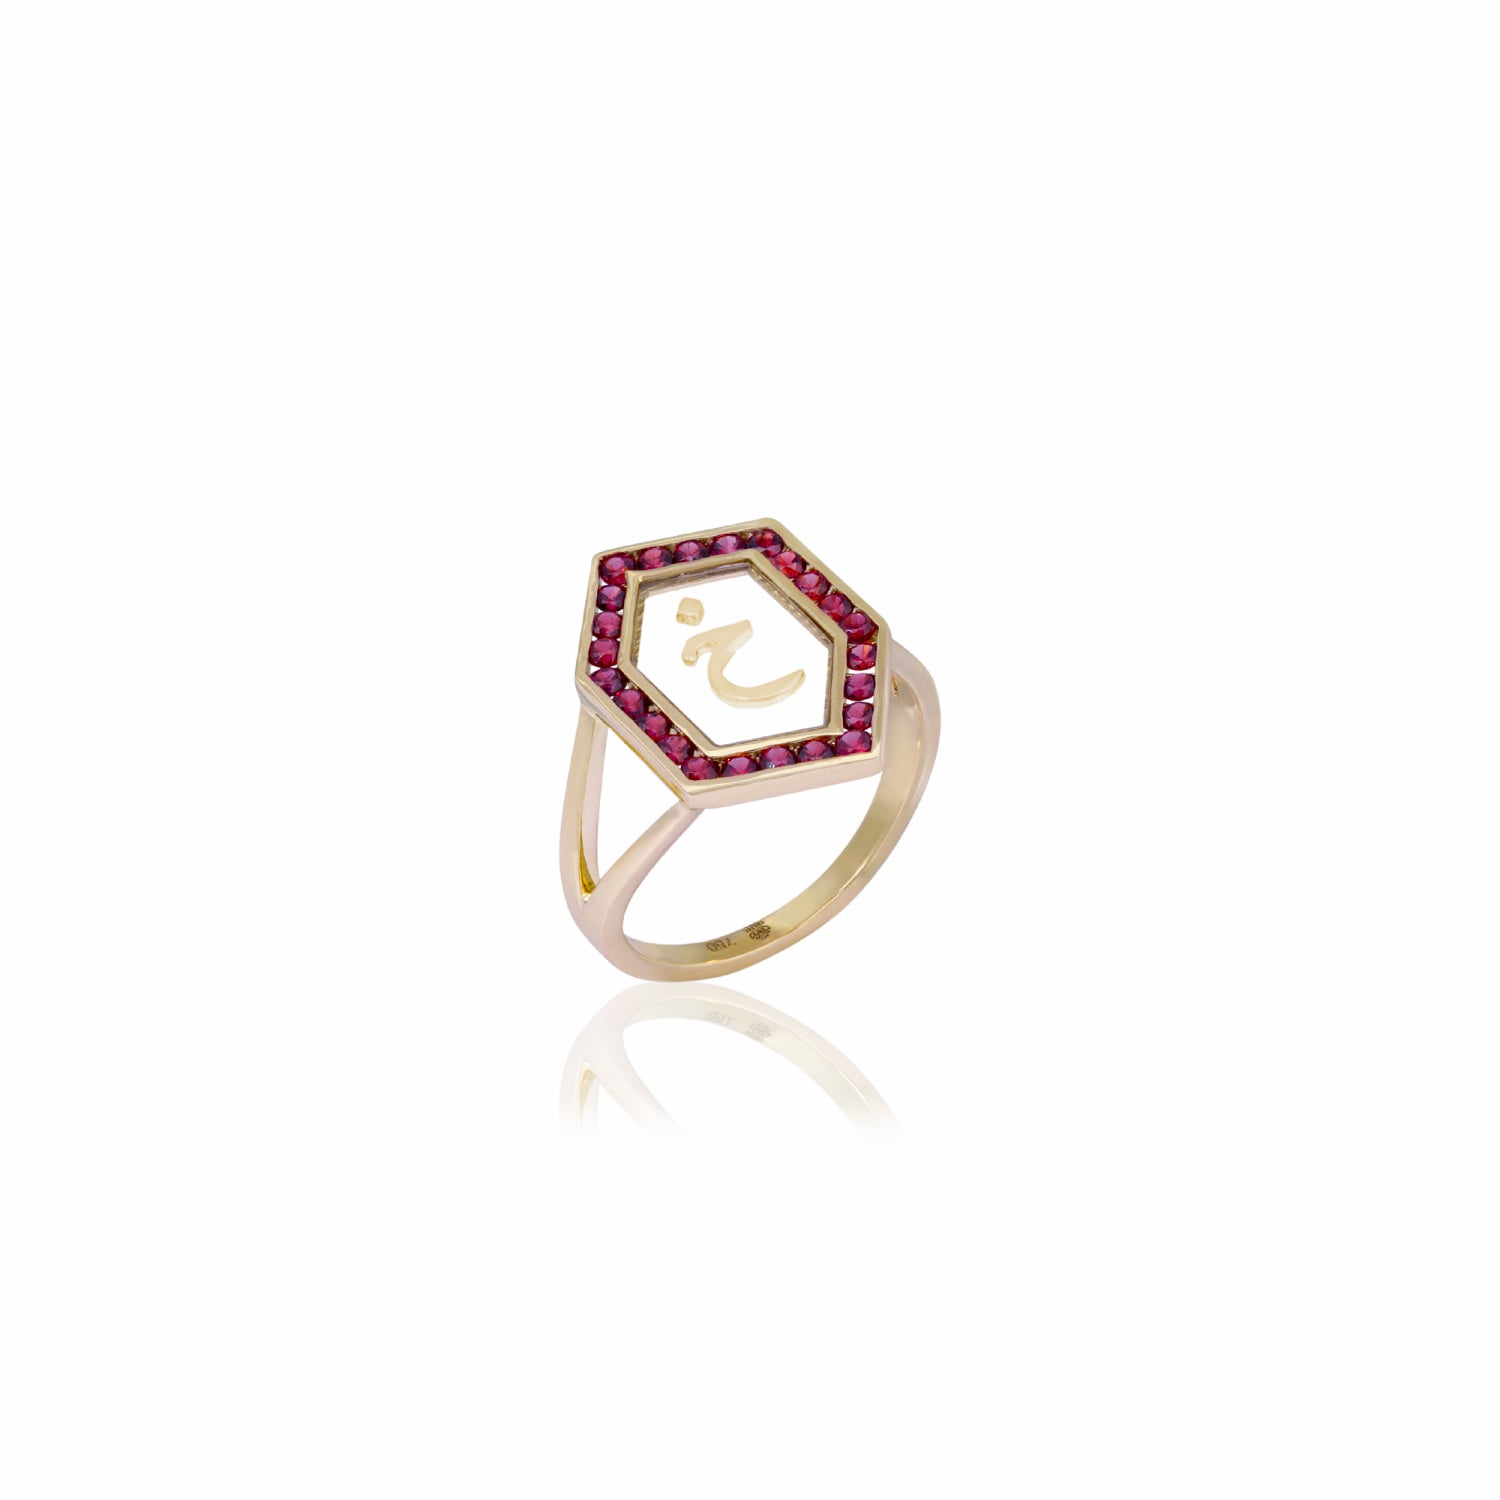 Qamoos 1.0 Letter خ Ruby Ring in Yellow Gold